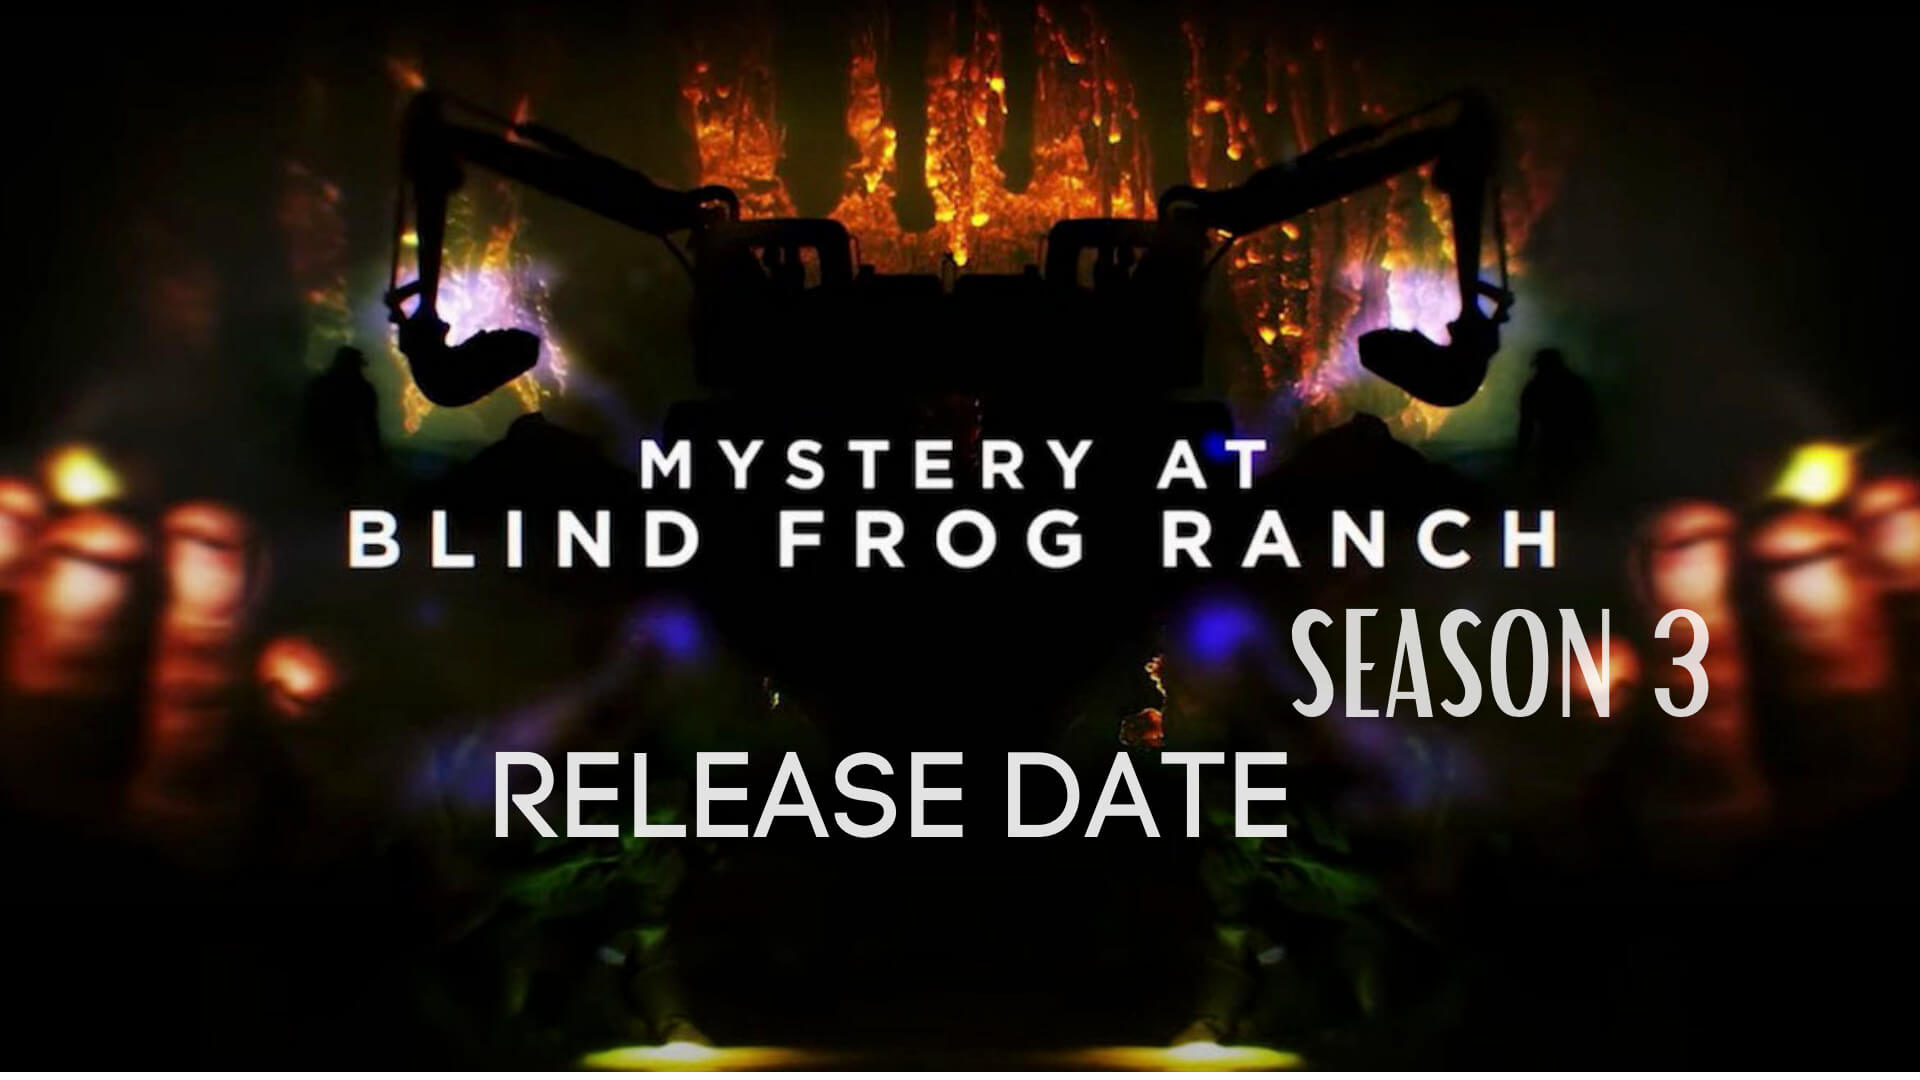 How many seasons of the Mystery At Blind Frog Ranch are there?